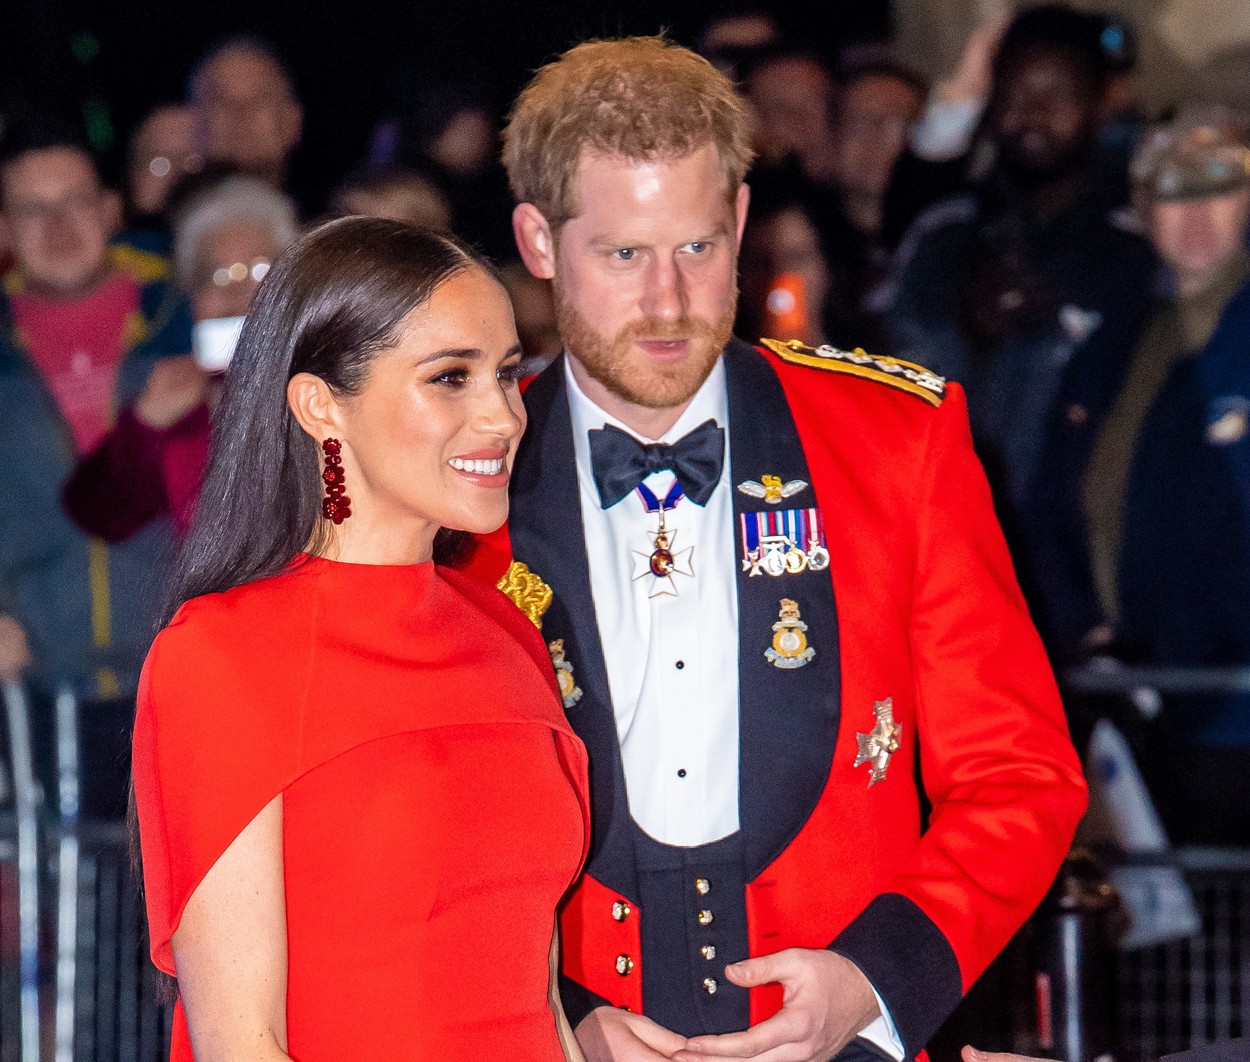 On March 31, Prince Harry and Meghan Markle, the Duke and Duchess of Sussex will be quitting as senior royals and along with that, stop using their HRH styles and no longer be able to have Sussex Royal as their brand. Together with their baby son Archie they are partly going to live in either Canada or the United States, where they want to become financially independent.
30 Mar 2020
 Together with their baby son Archie they are partly going to live in either Canada or the United States, where they want to become financially independent., Image: 510799140, License: Rights-managed, Restrictions: NO Netherlands, Model Release: no, Credit line: MEGA / The Mega Agency / Profimedia